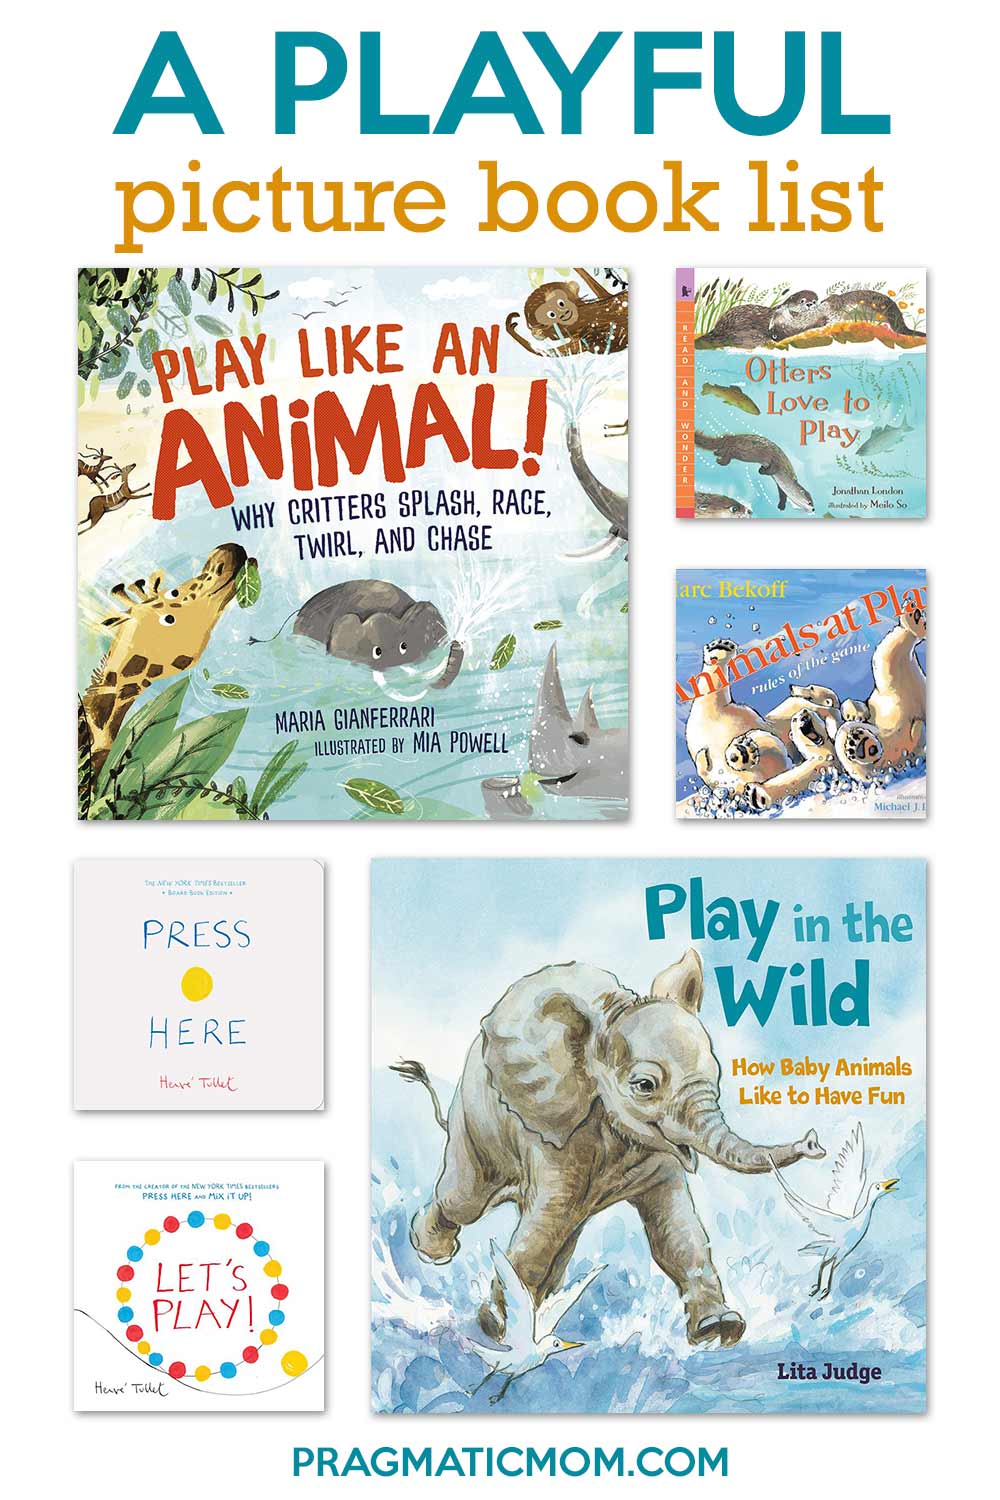 A Playful Picture Book List & GIVEAWAY! - Pragmatic Mom